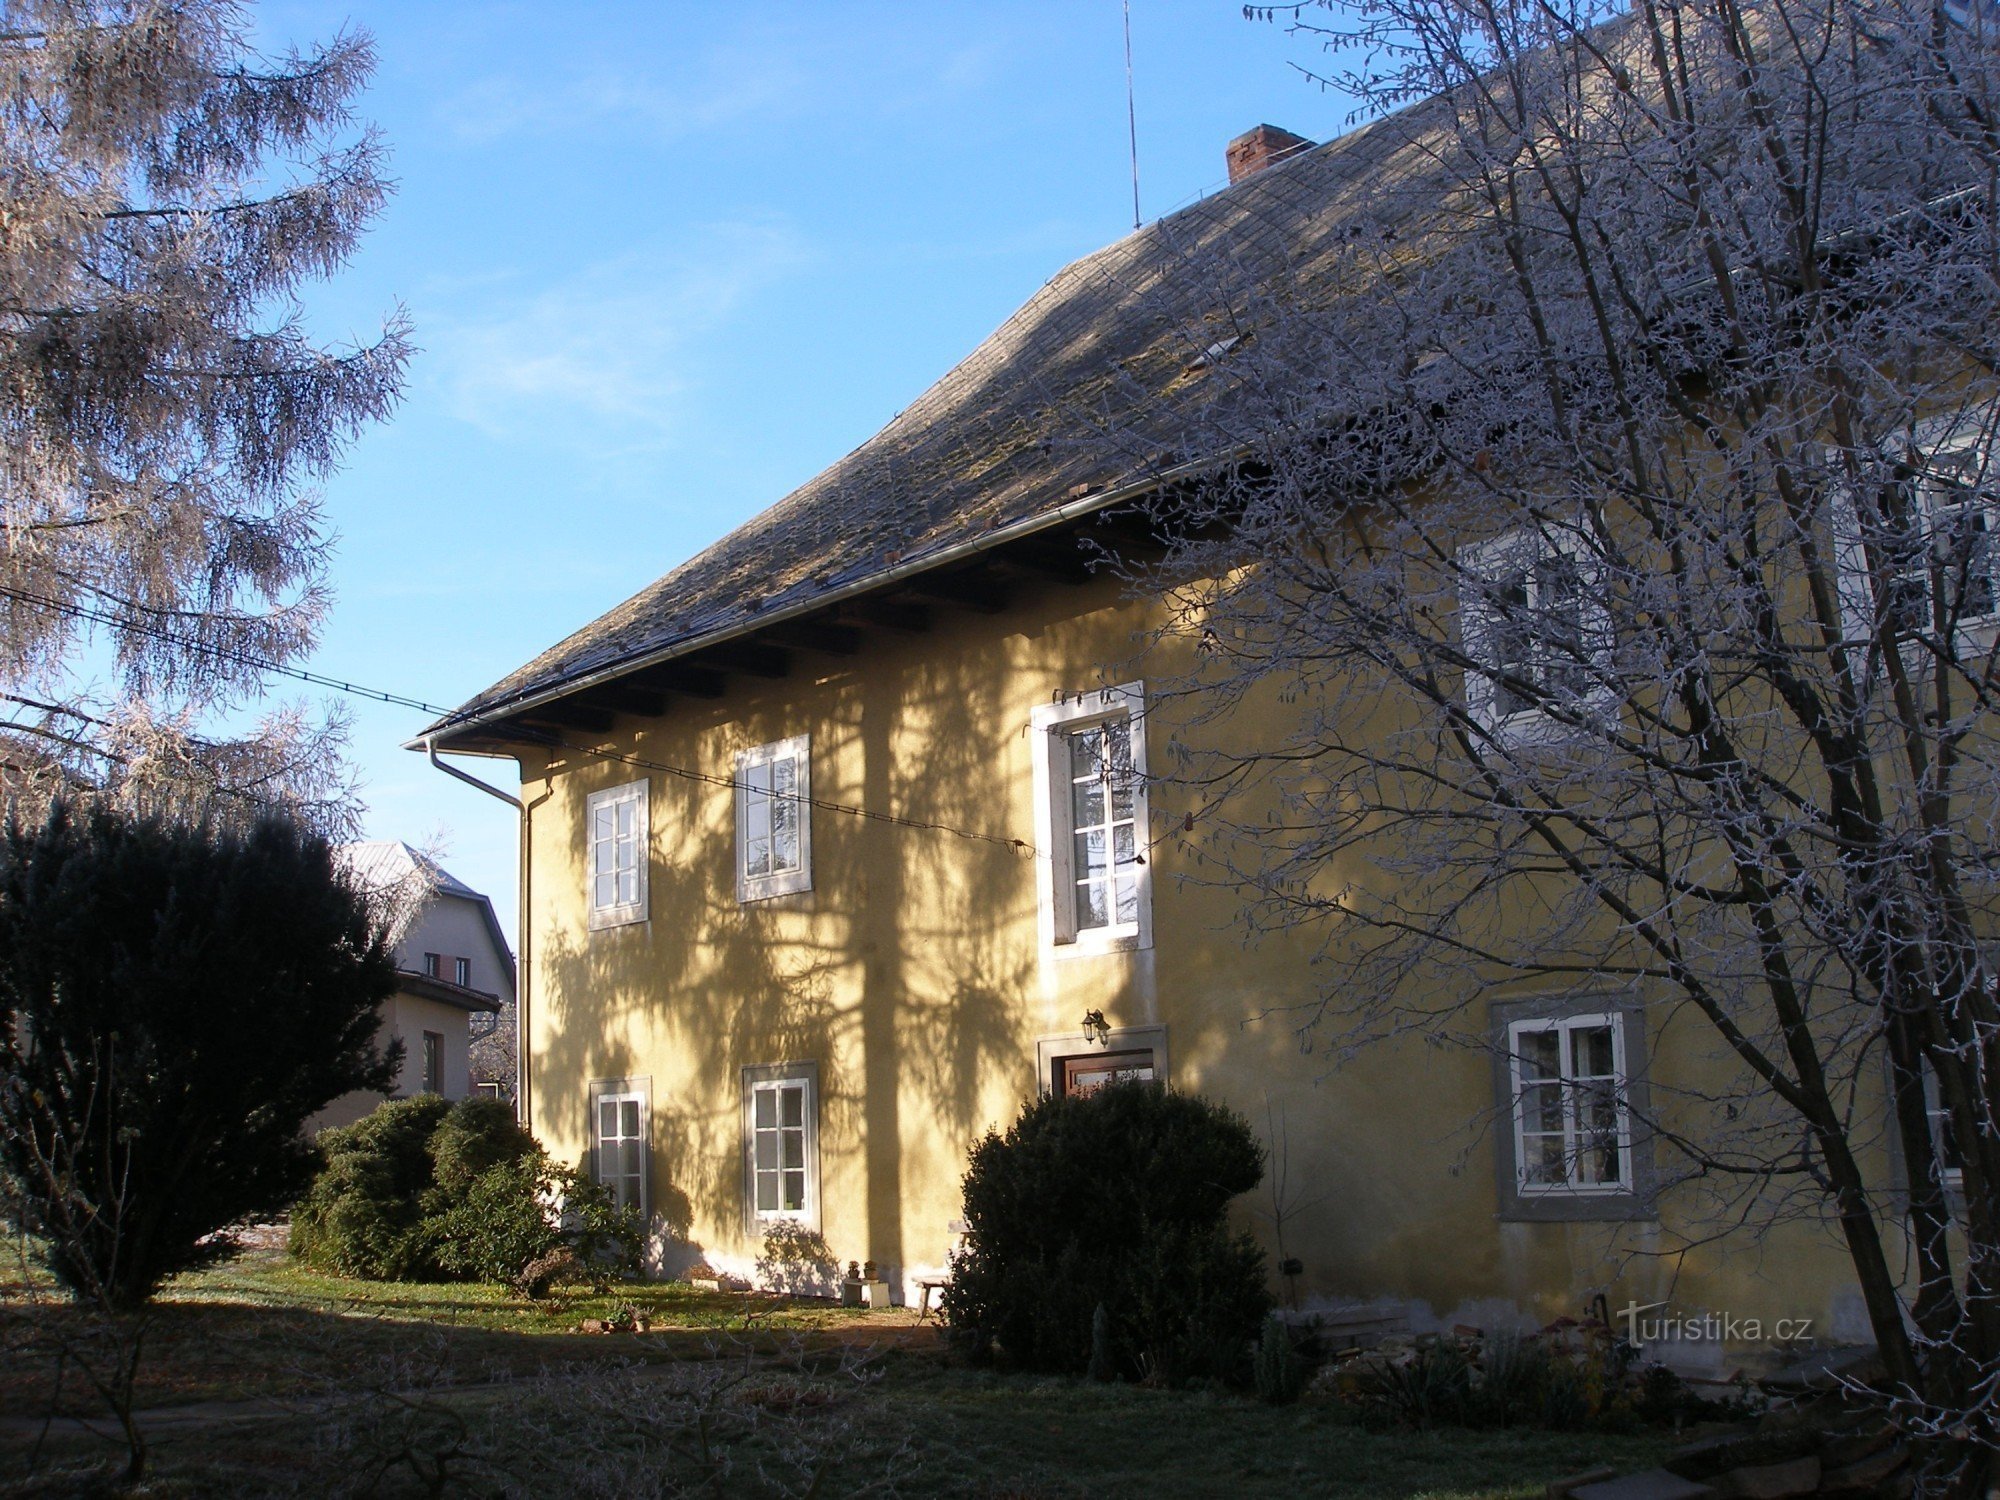 The former parsonage in the village of Sudslava built in 1692